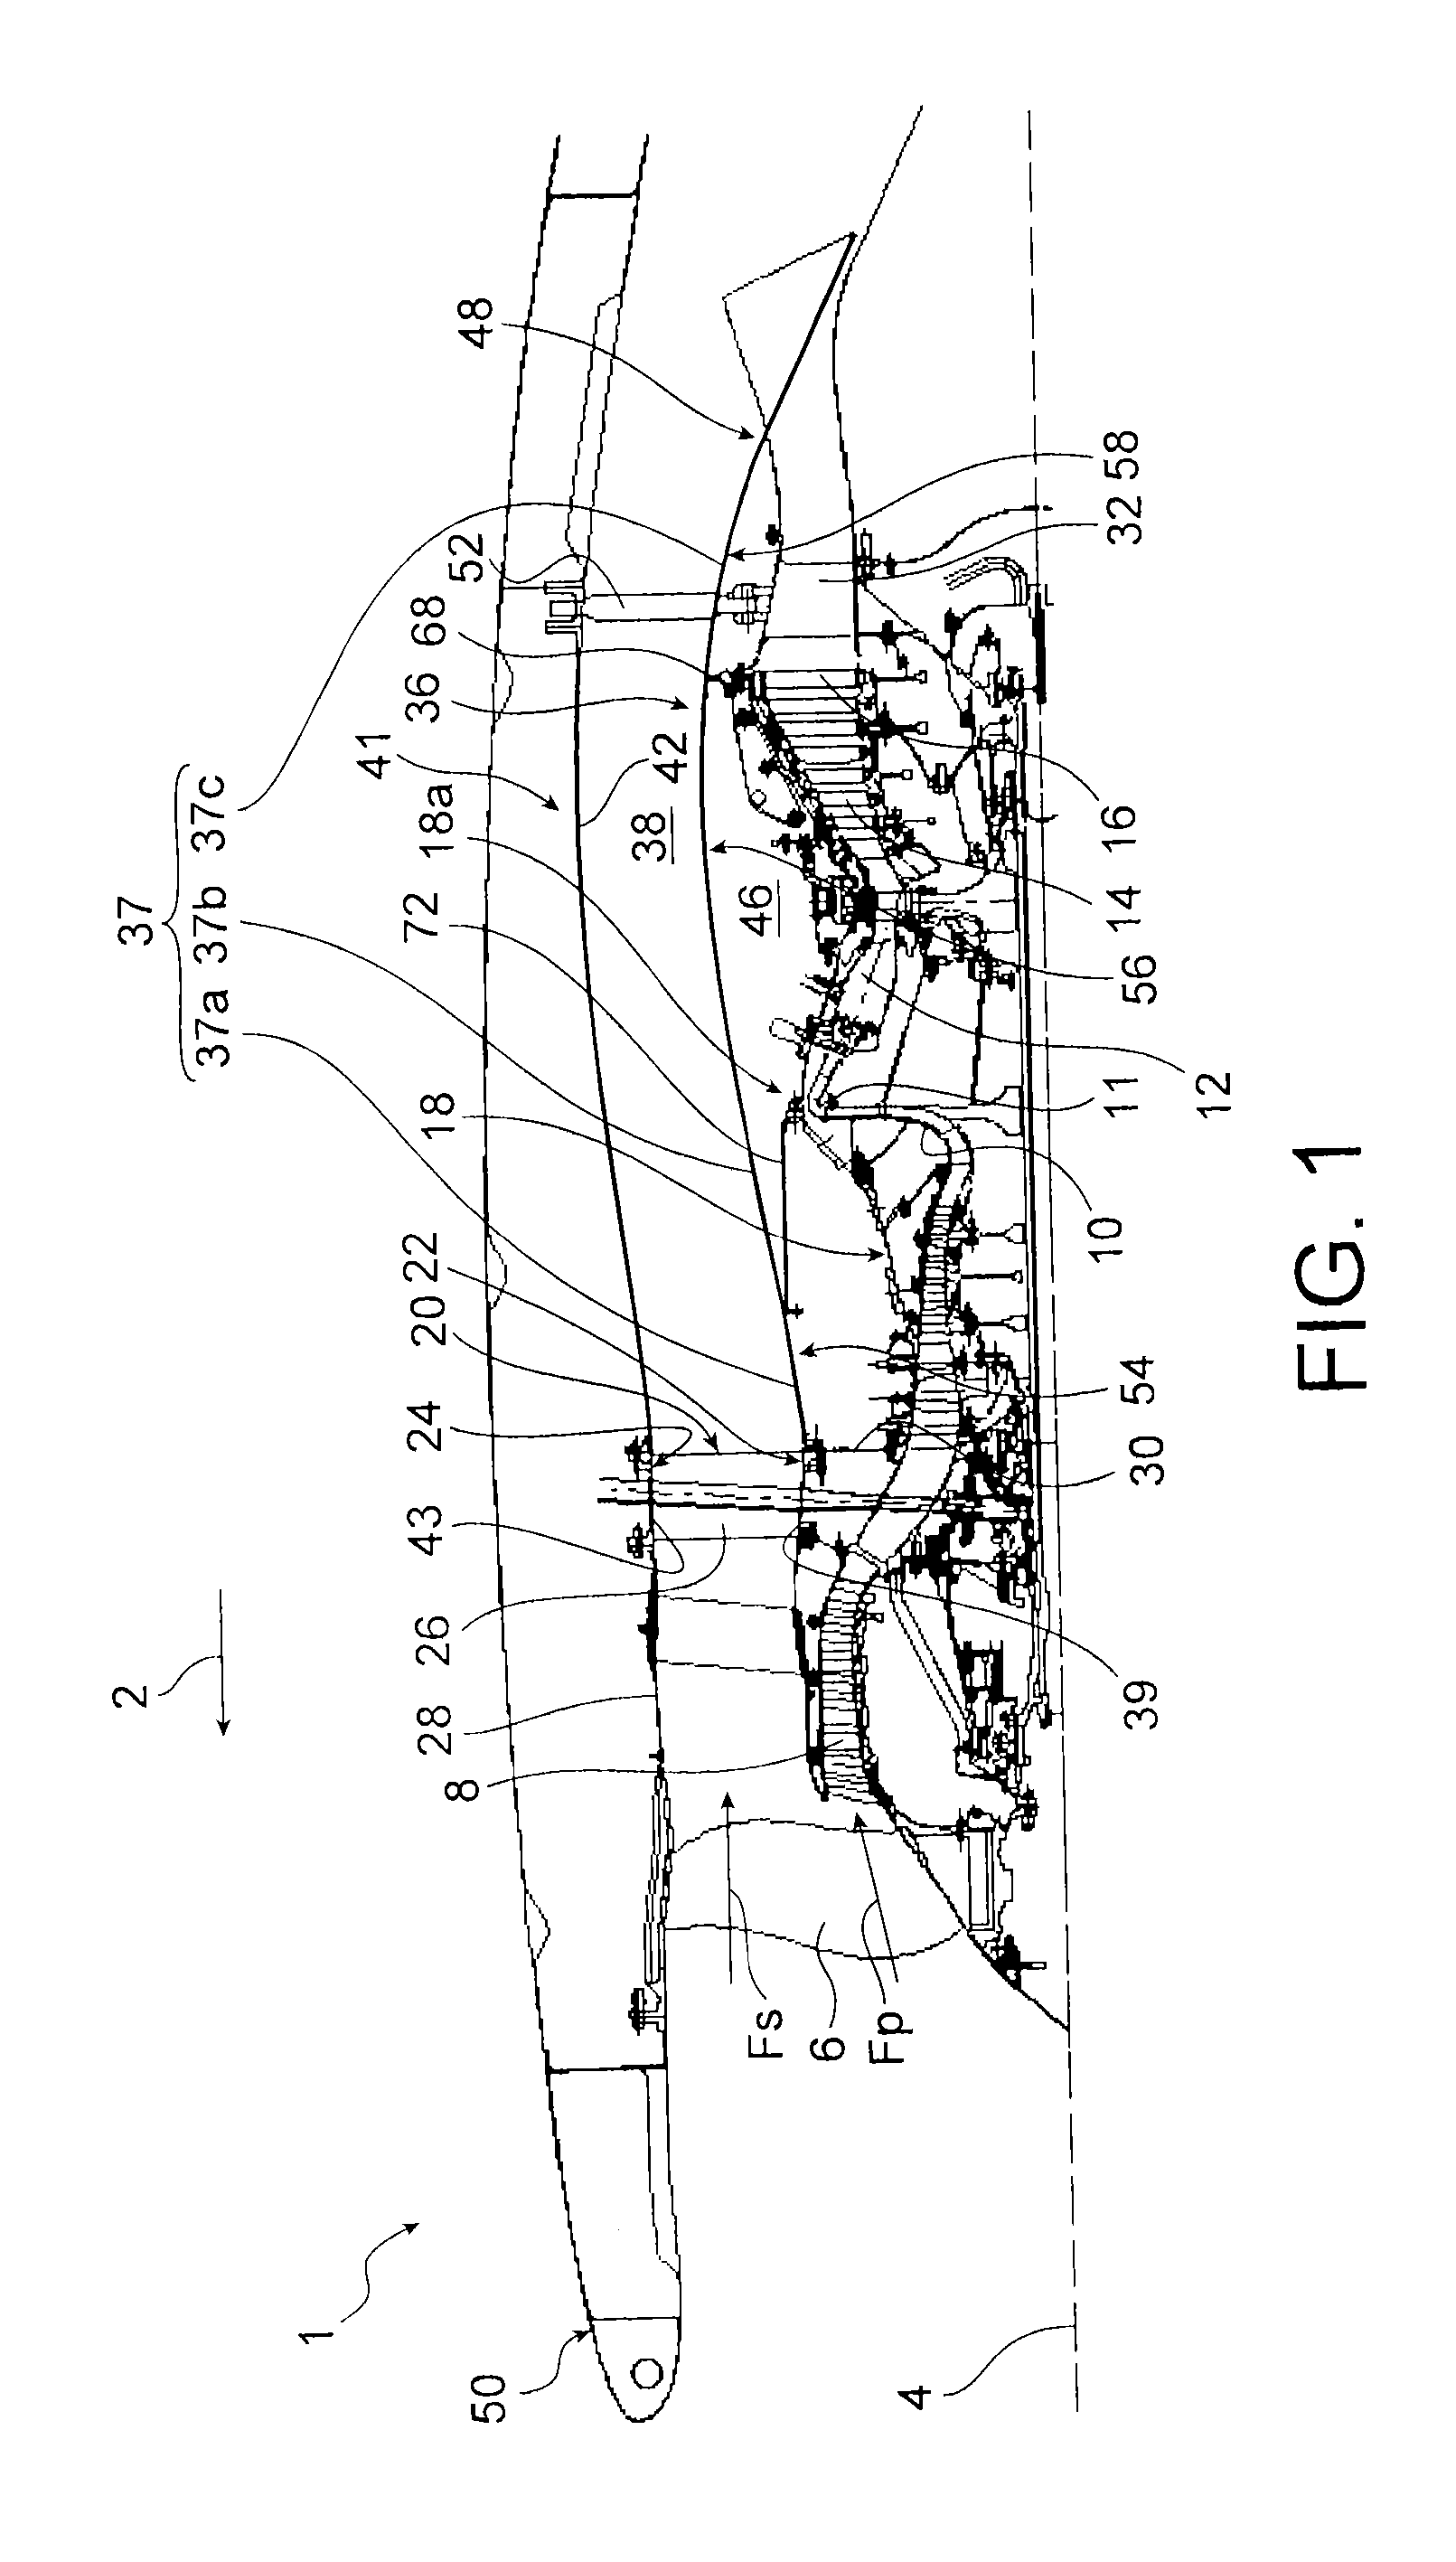 Dual-flow turbomachine for aircraft, including structural means of rigidifying the central casing